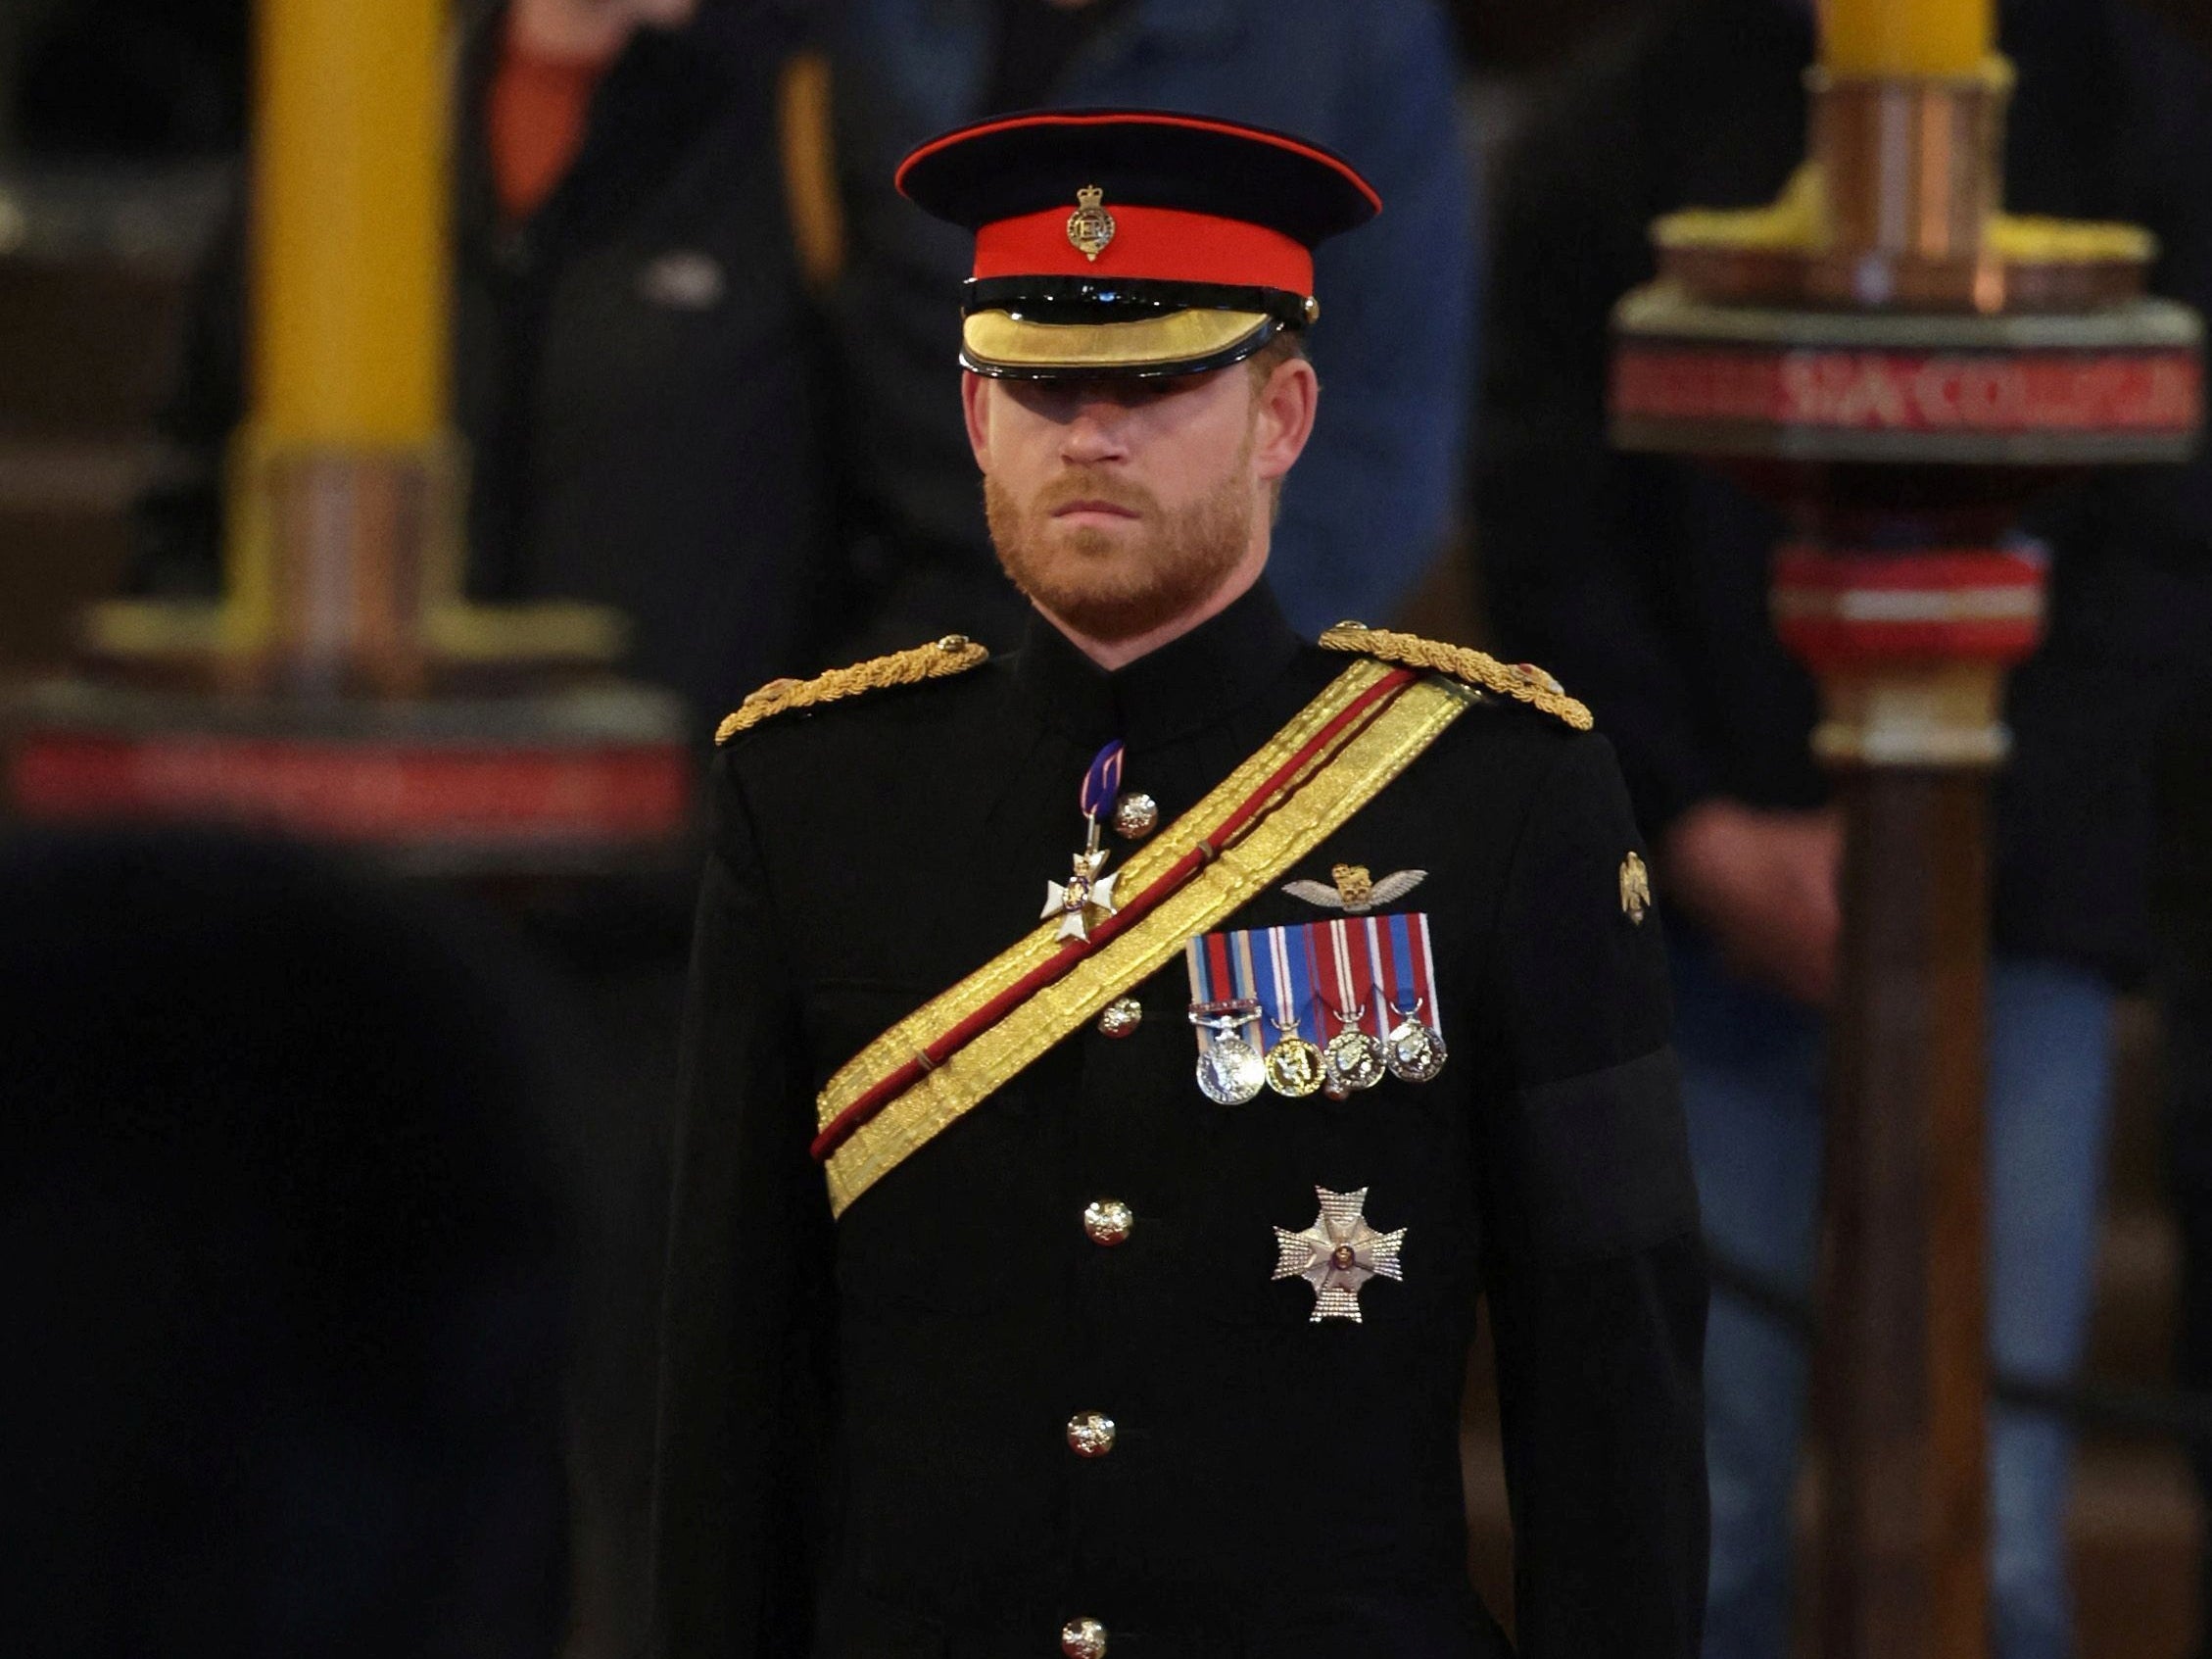 Prince Harry is now living in the US after quitting as a senior working royal